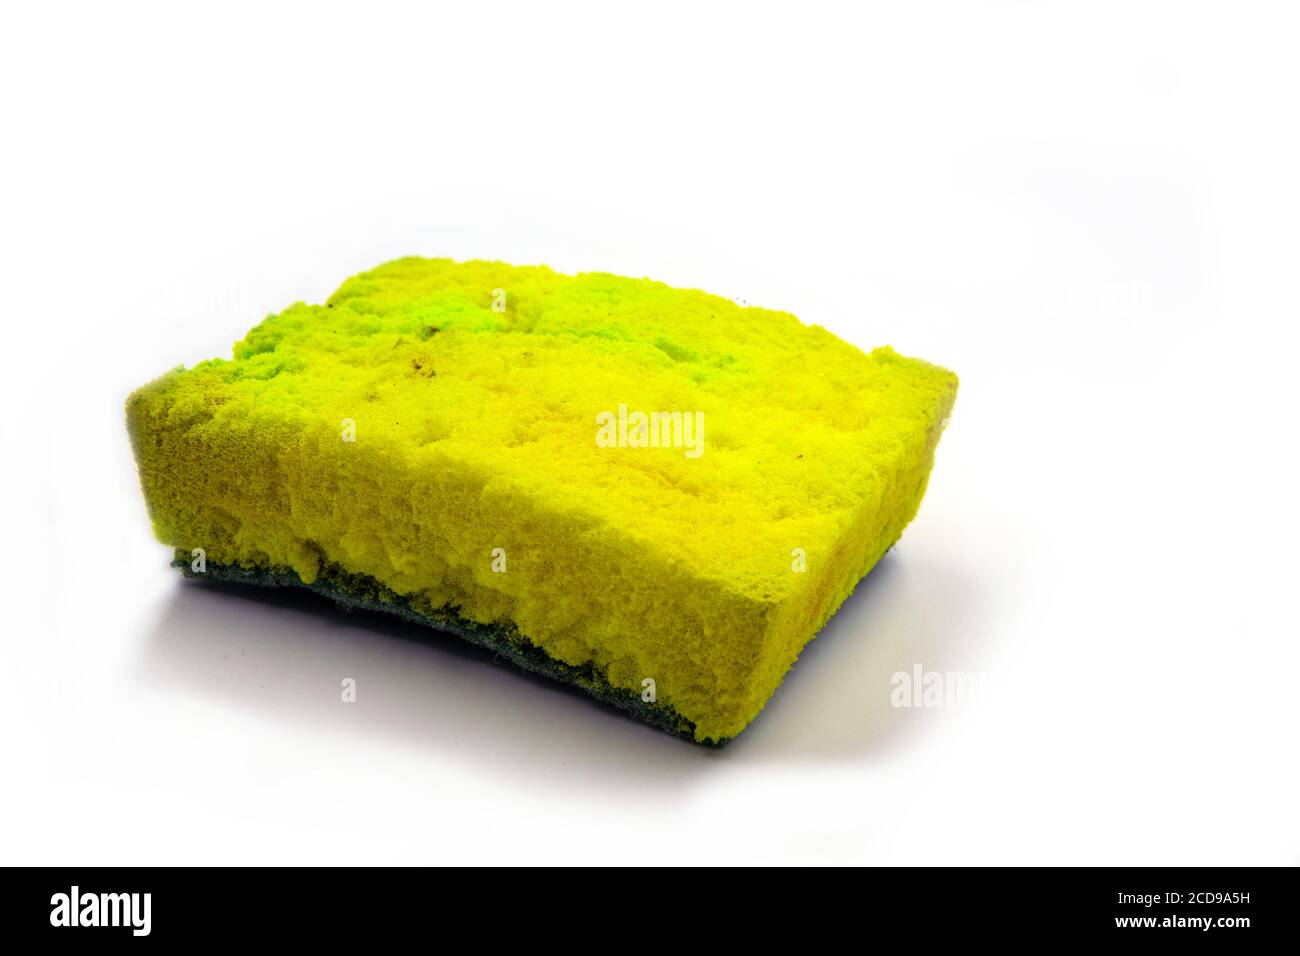 Used yellow sponge for dishwashing photo on white background. Foam rubber sponge with microbe and bacteria. House cleaning tools. Used household item. Stock Photo